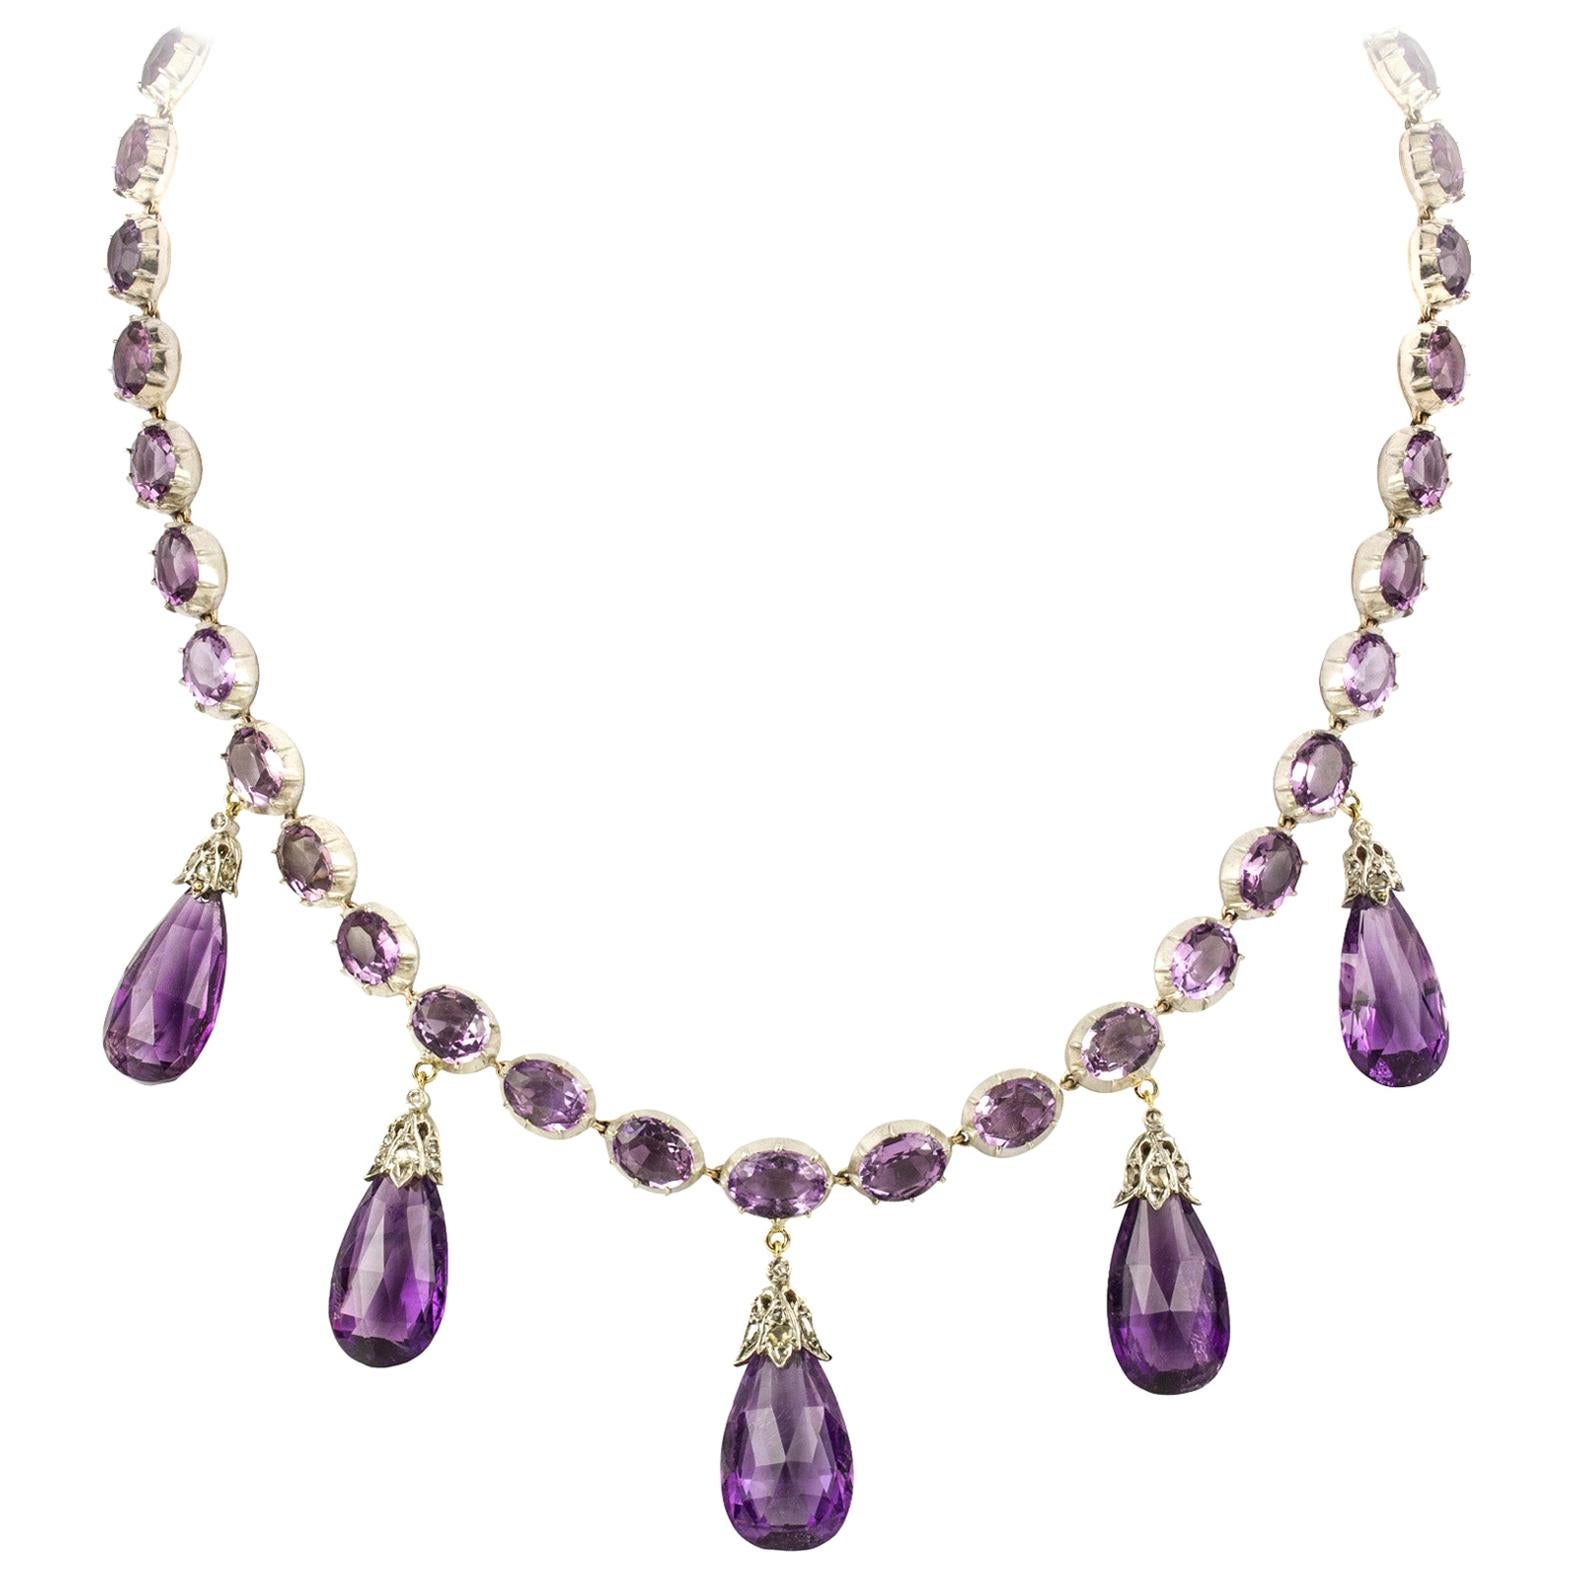 Late Victorian Amethyst Necklace and Earrings